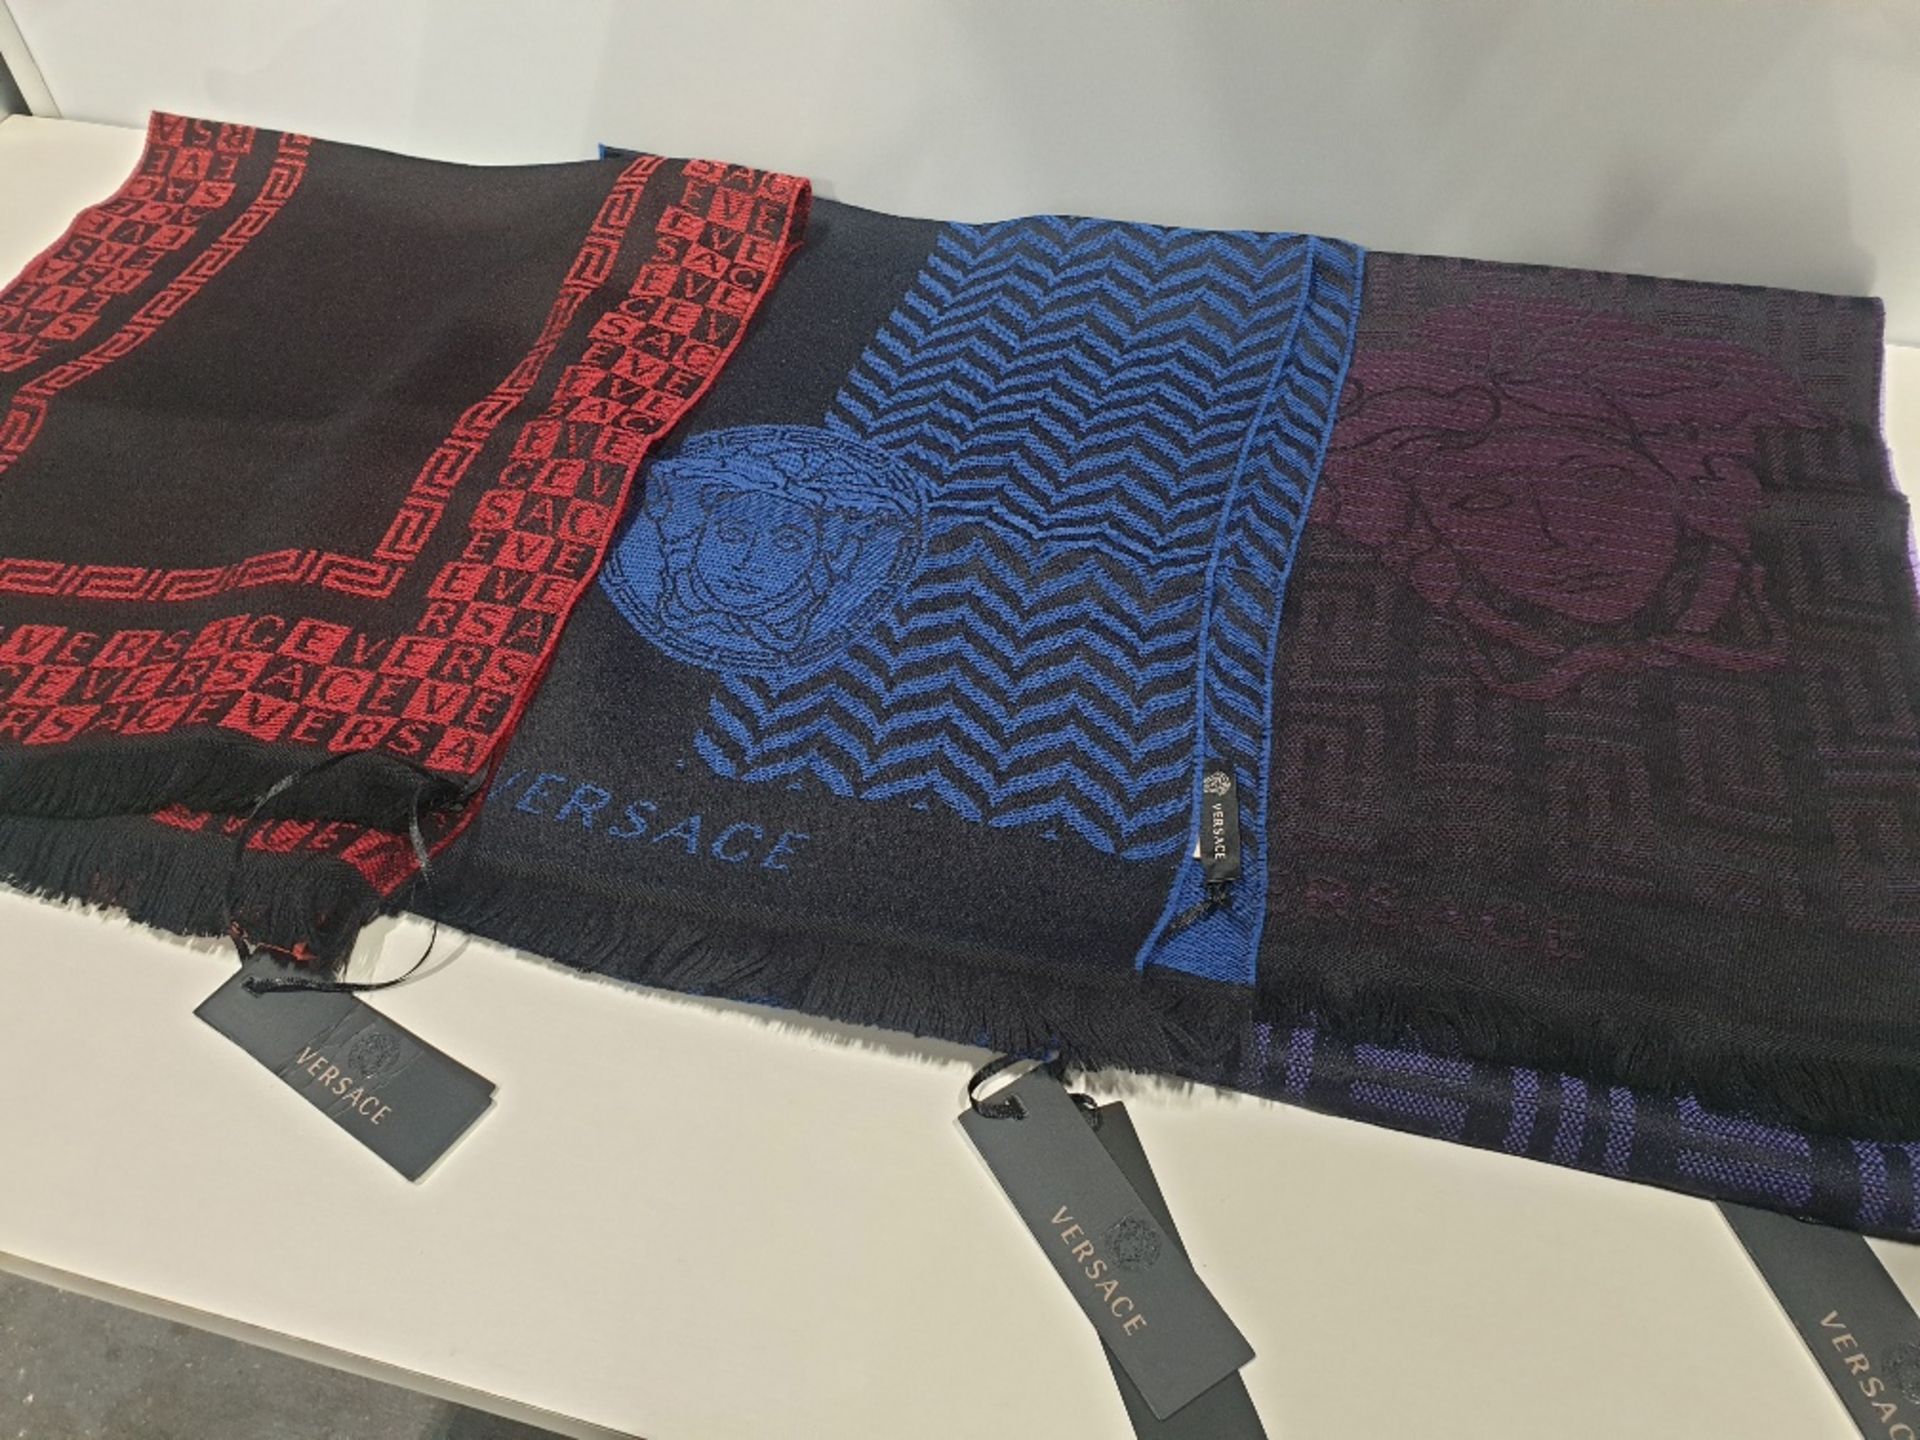 3 X BRAND NEW VERSACE WOOL SCARVES WITH TAGS IN ASSORTED COLOURS PURPLE, BLUE & RED - UNISEX RRP: £